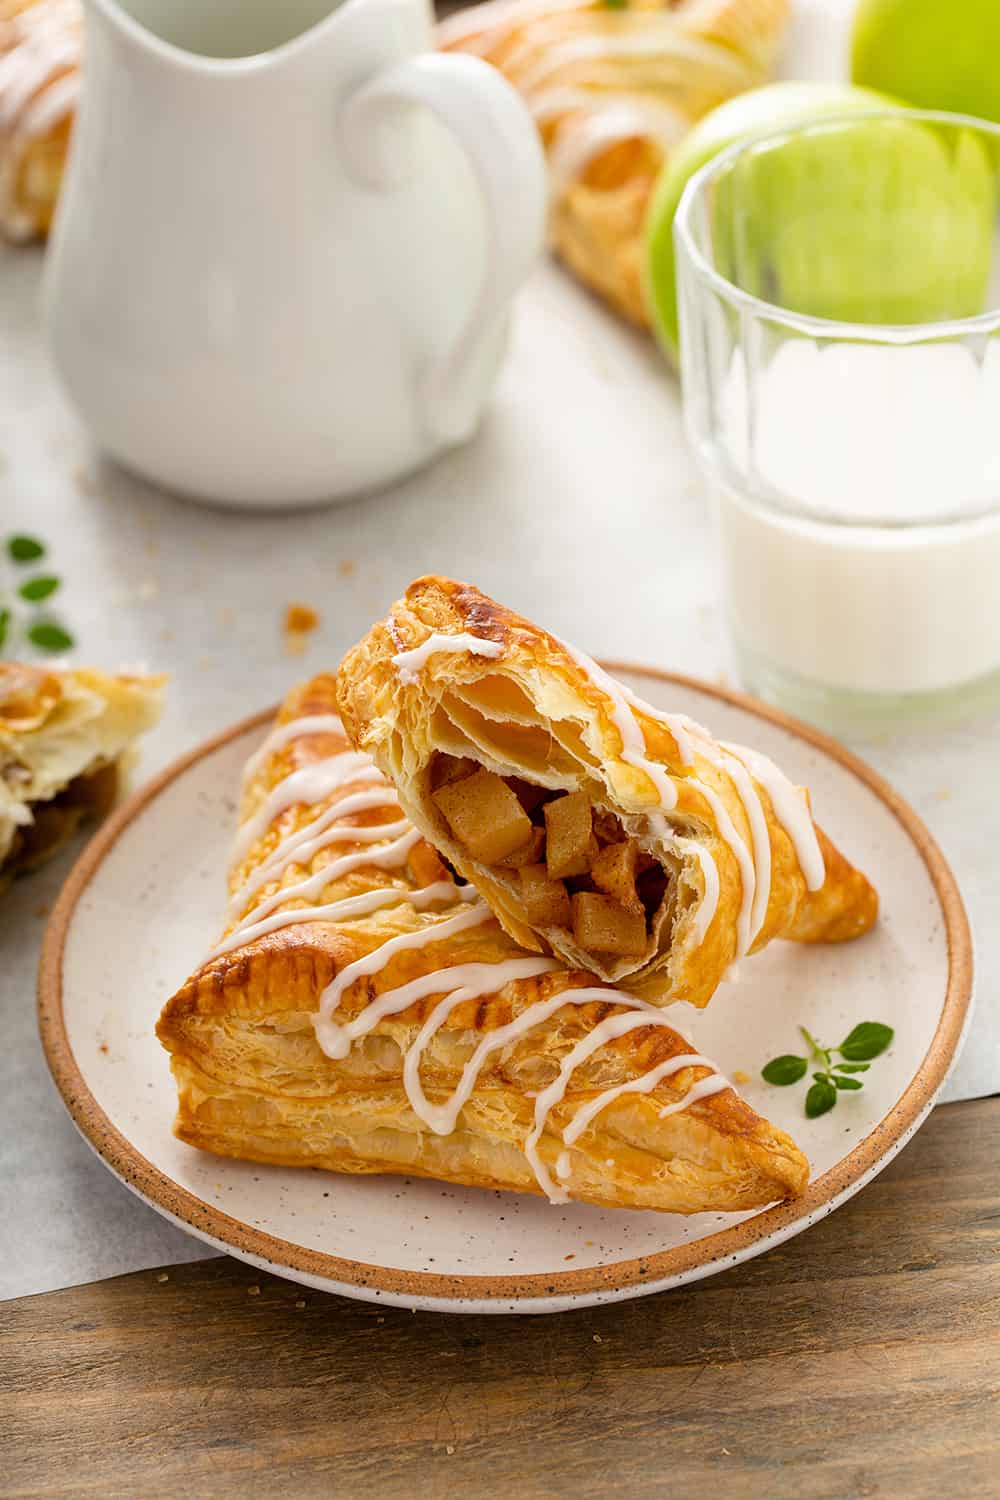 EASY APPLE TURNOVERS FROM SCRATCH